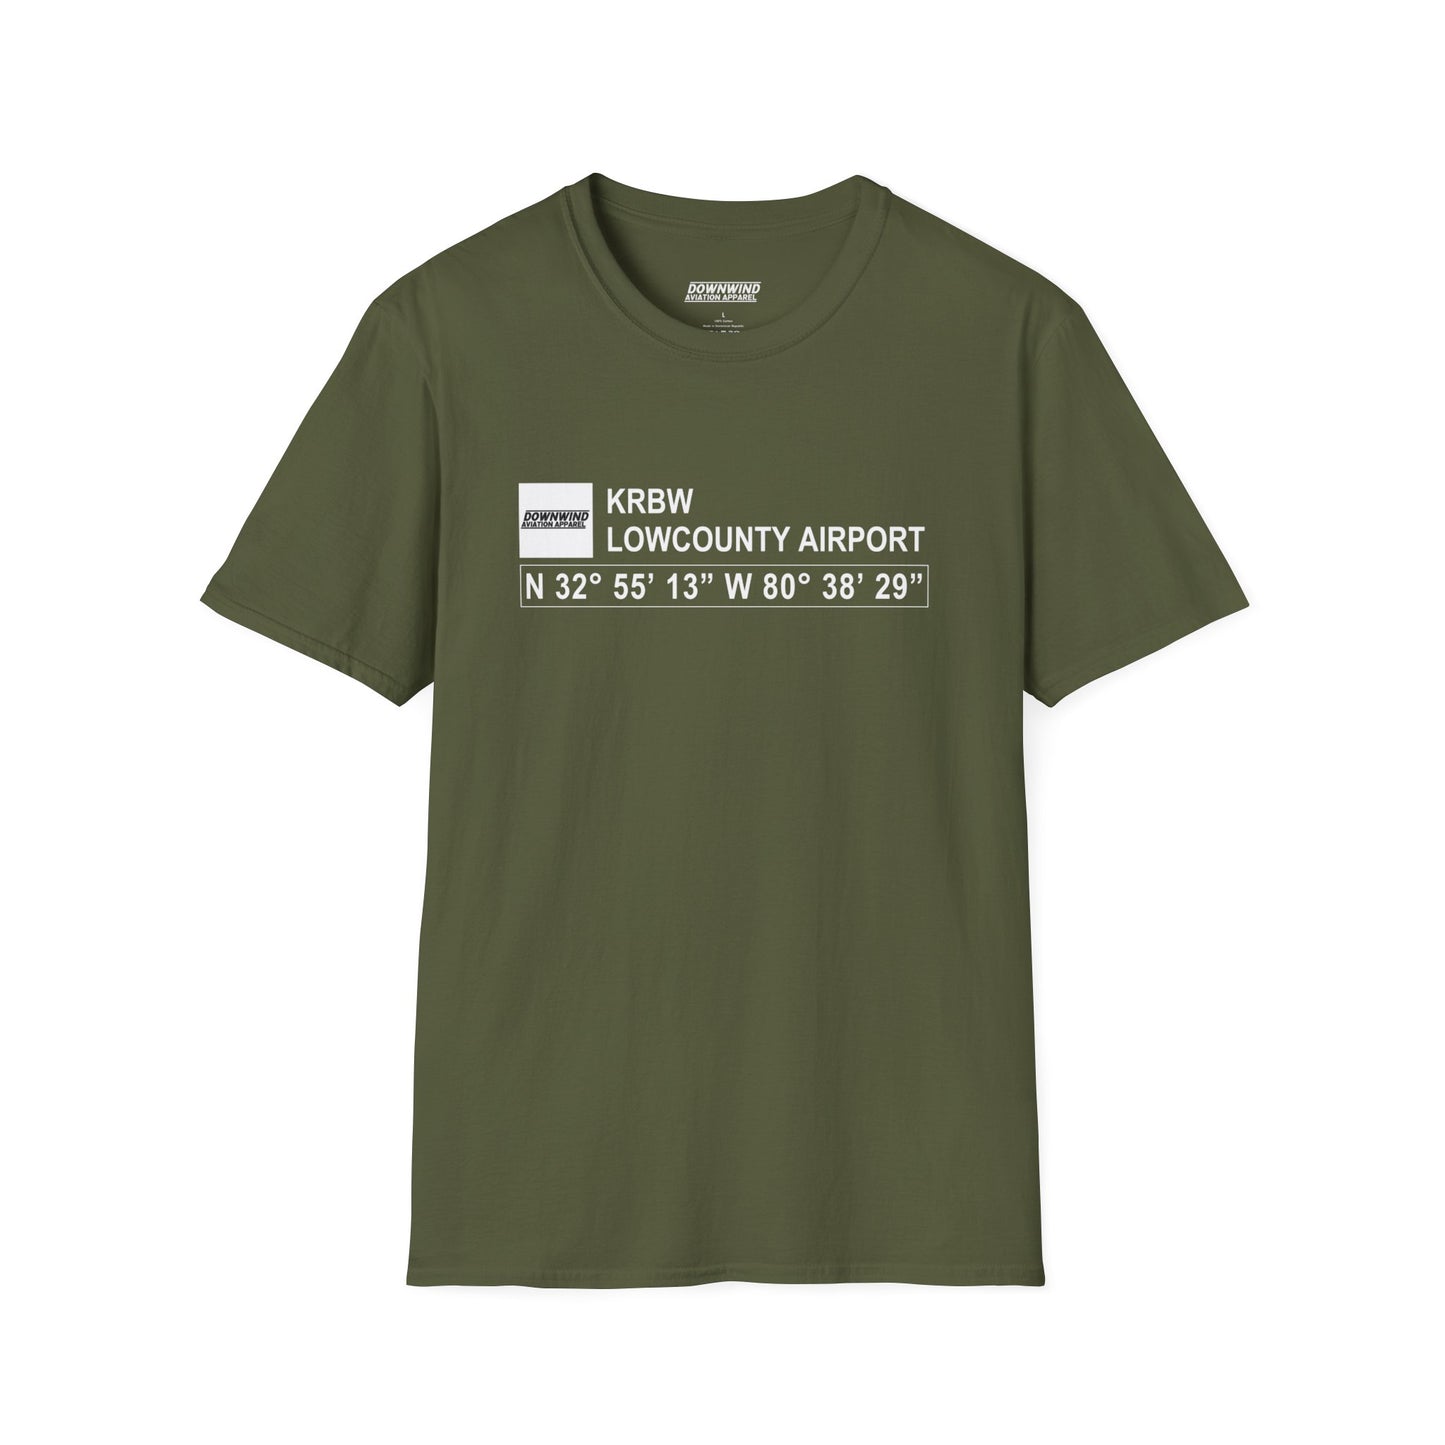 KRBW / Lowcounty Airport T-Shirt